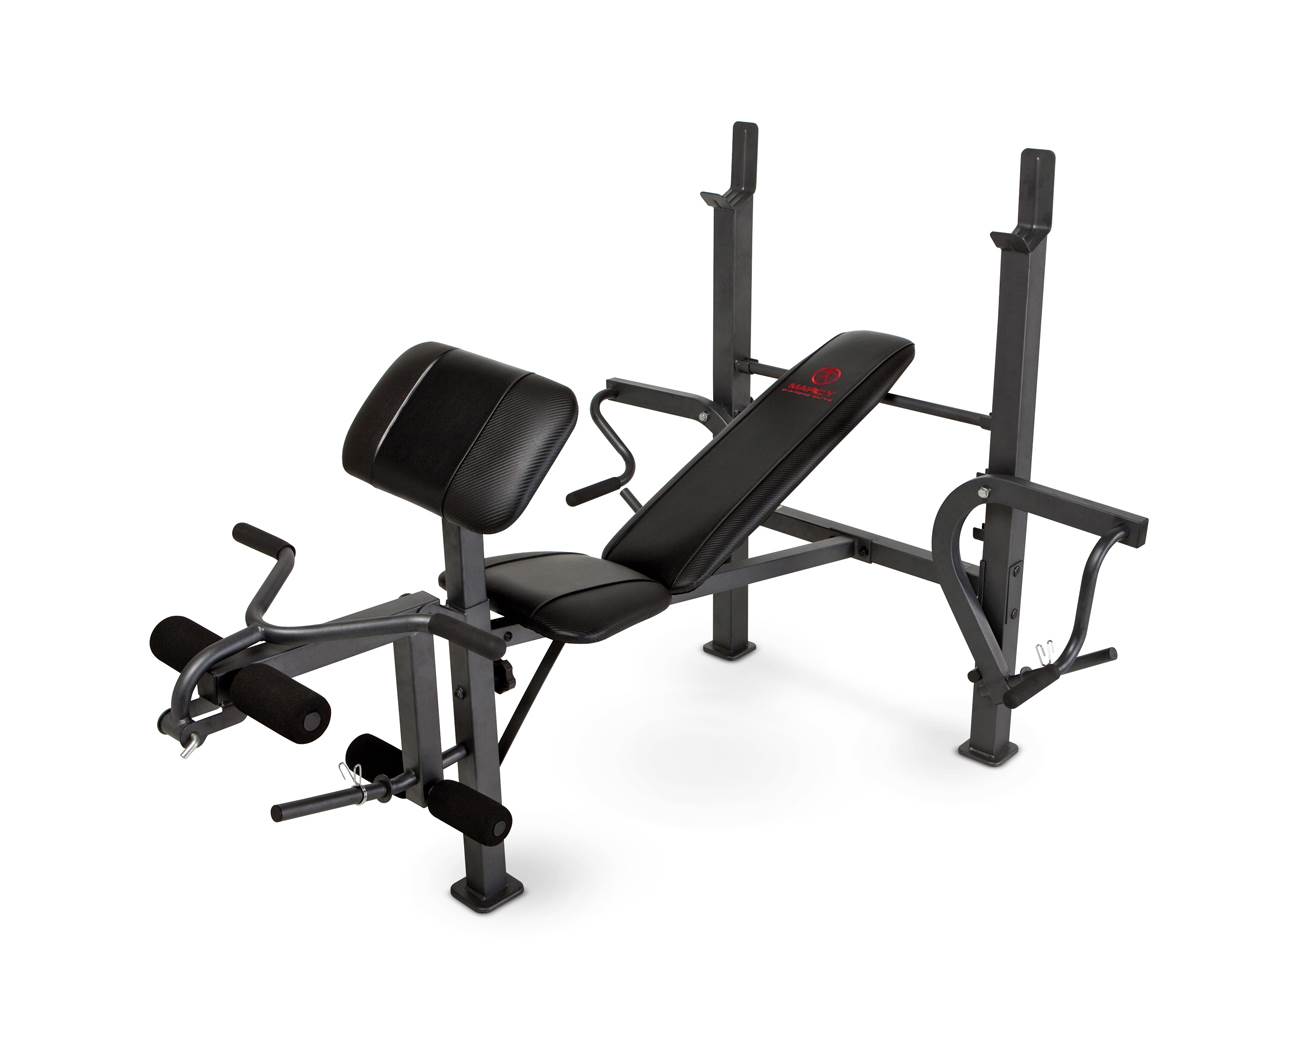 Marcy Adjustable Standard Weight Bench with Butterfly MD-389 - image 1 of 7